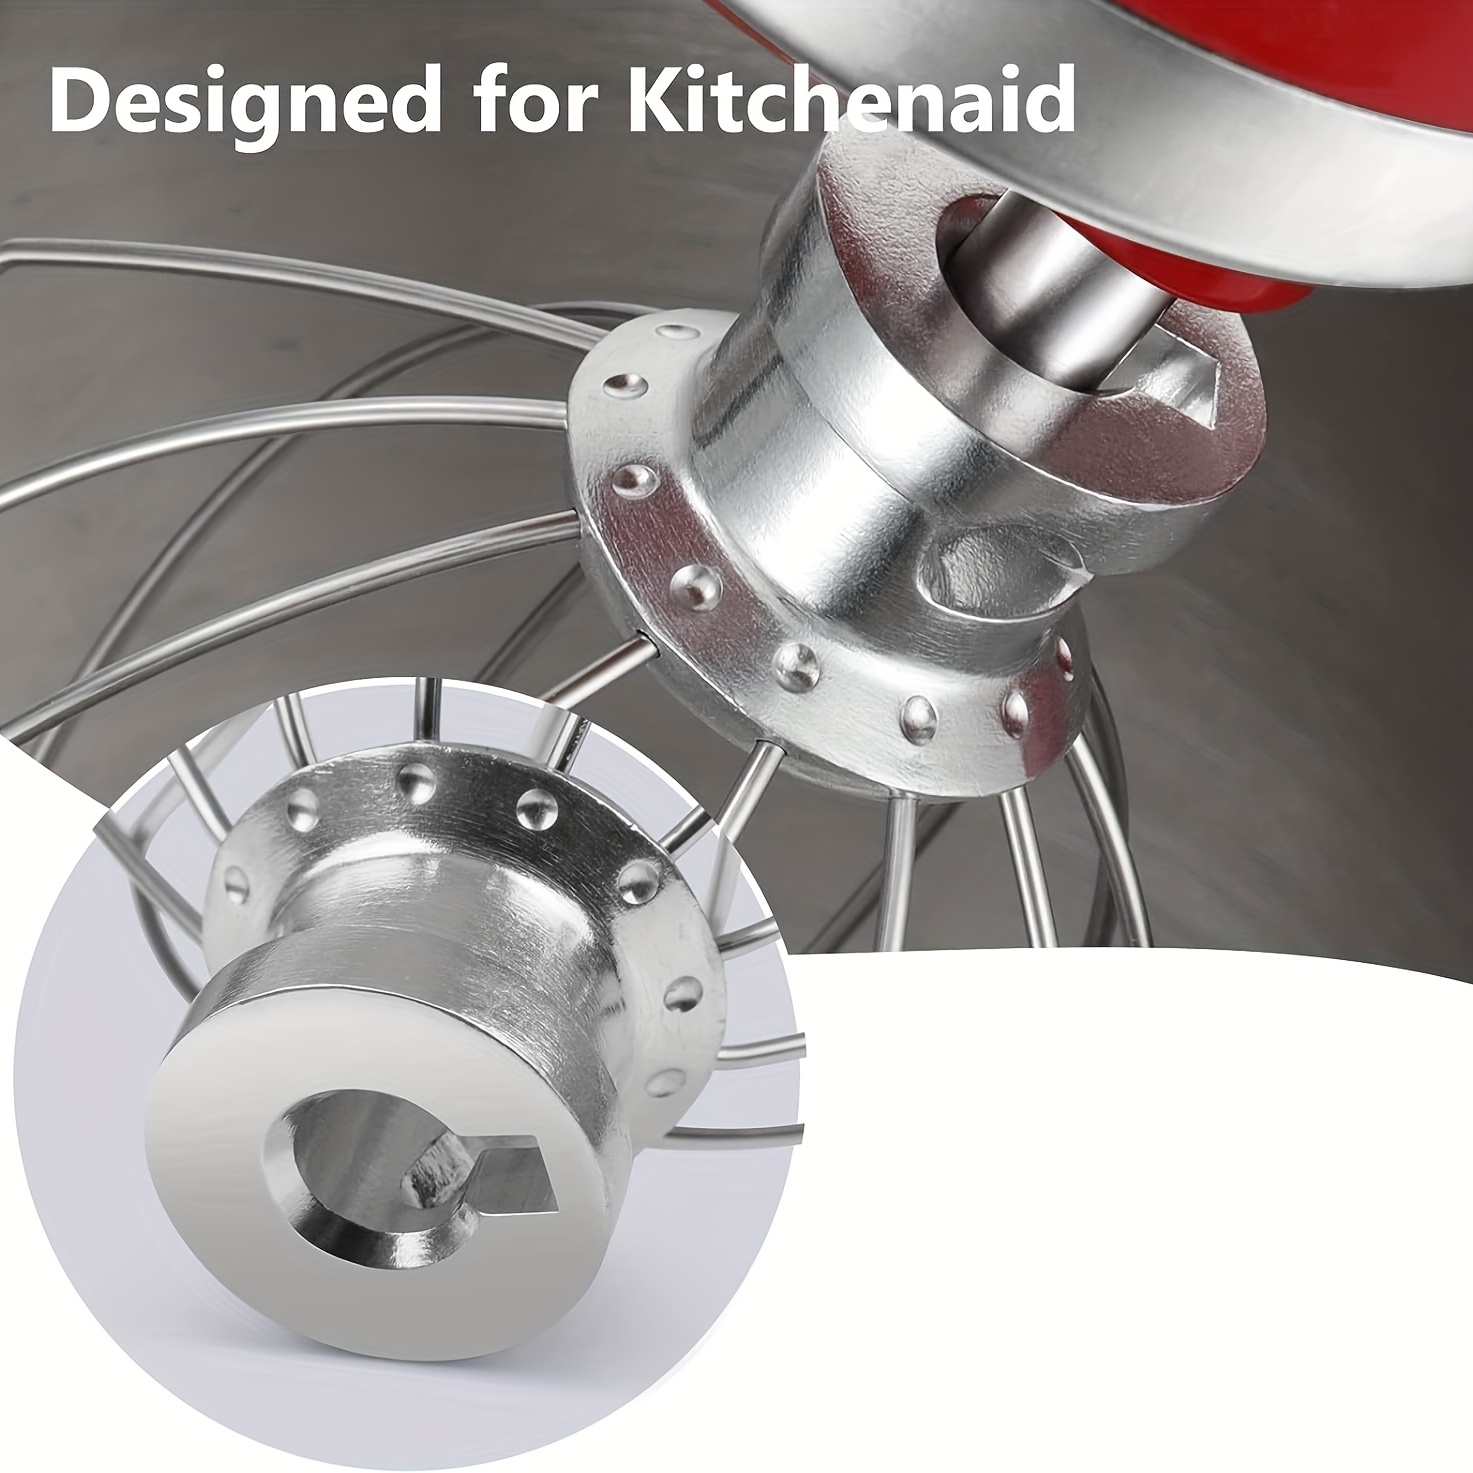 KITCHPOWERR Kn256ww 6-Wire Whip Attachment for KitchenAid 6 Quart Bowl-Lift Stand Mixer Accessory Replacement, Egg Cream Stirrer, Cakes Mayonnaise